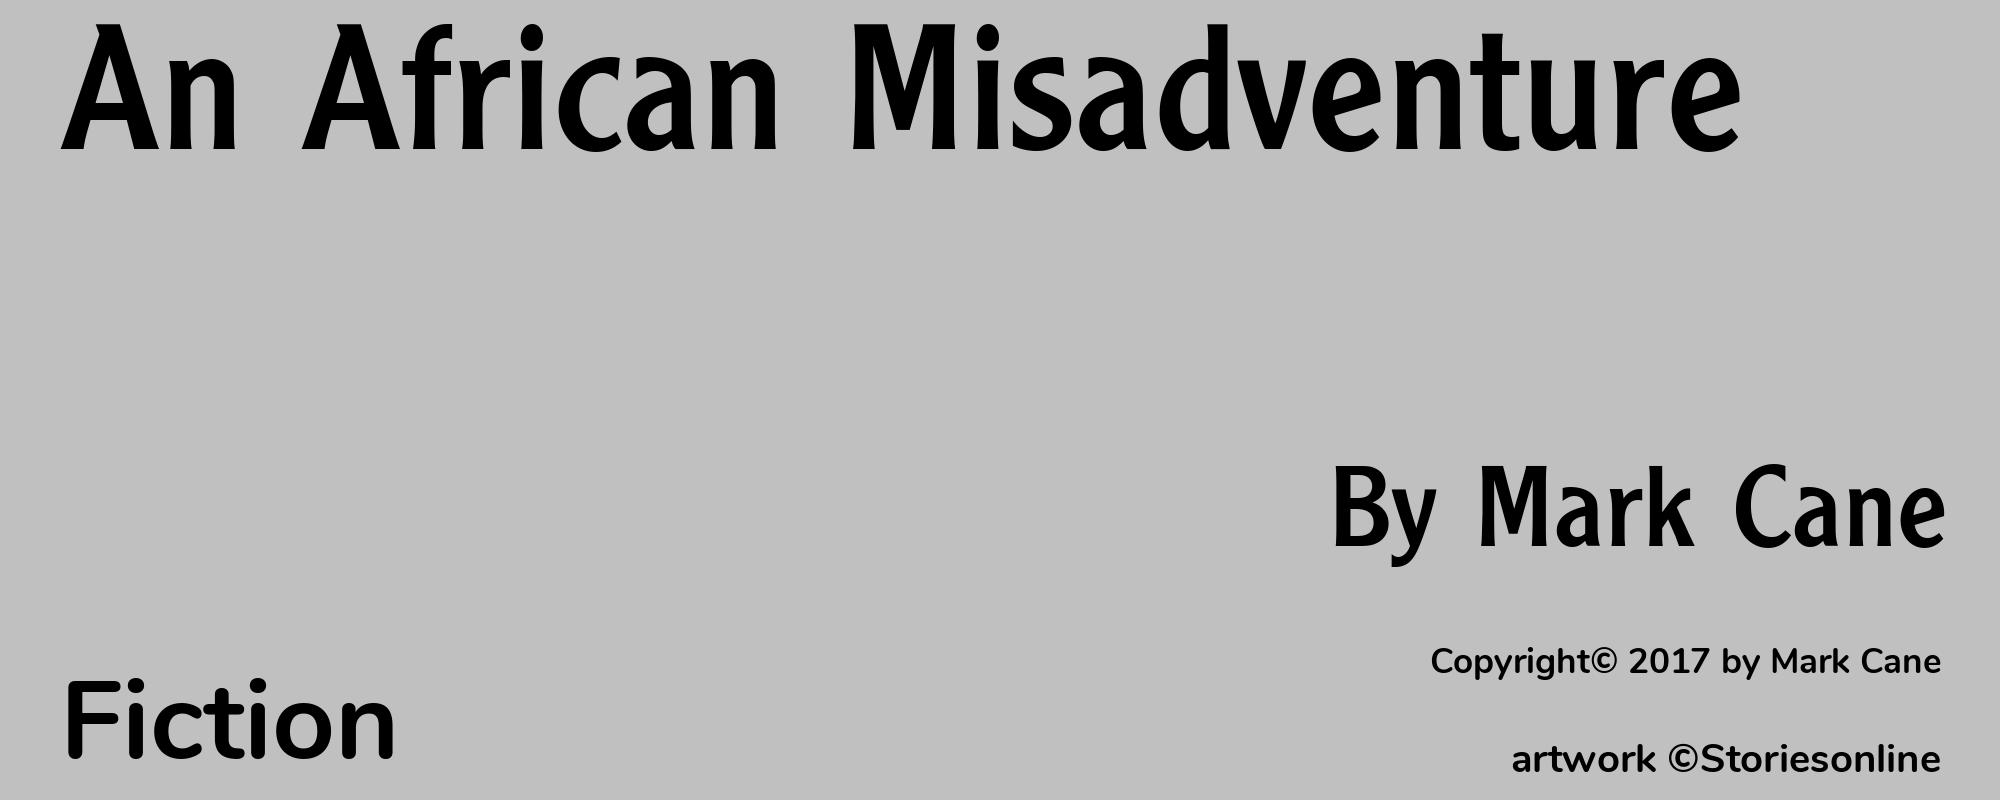 An African Misadventure - Cover